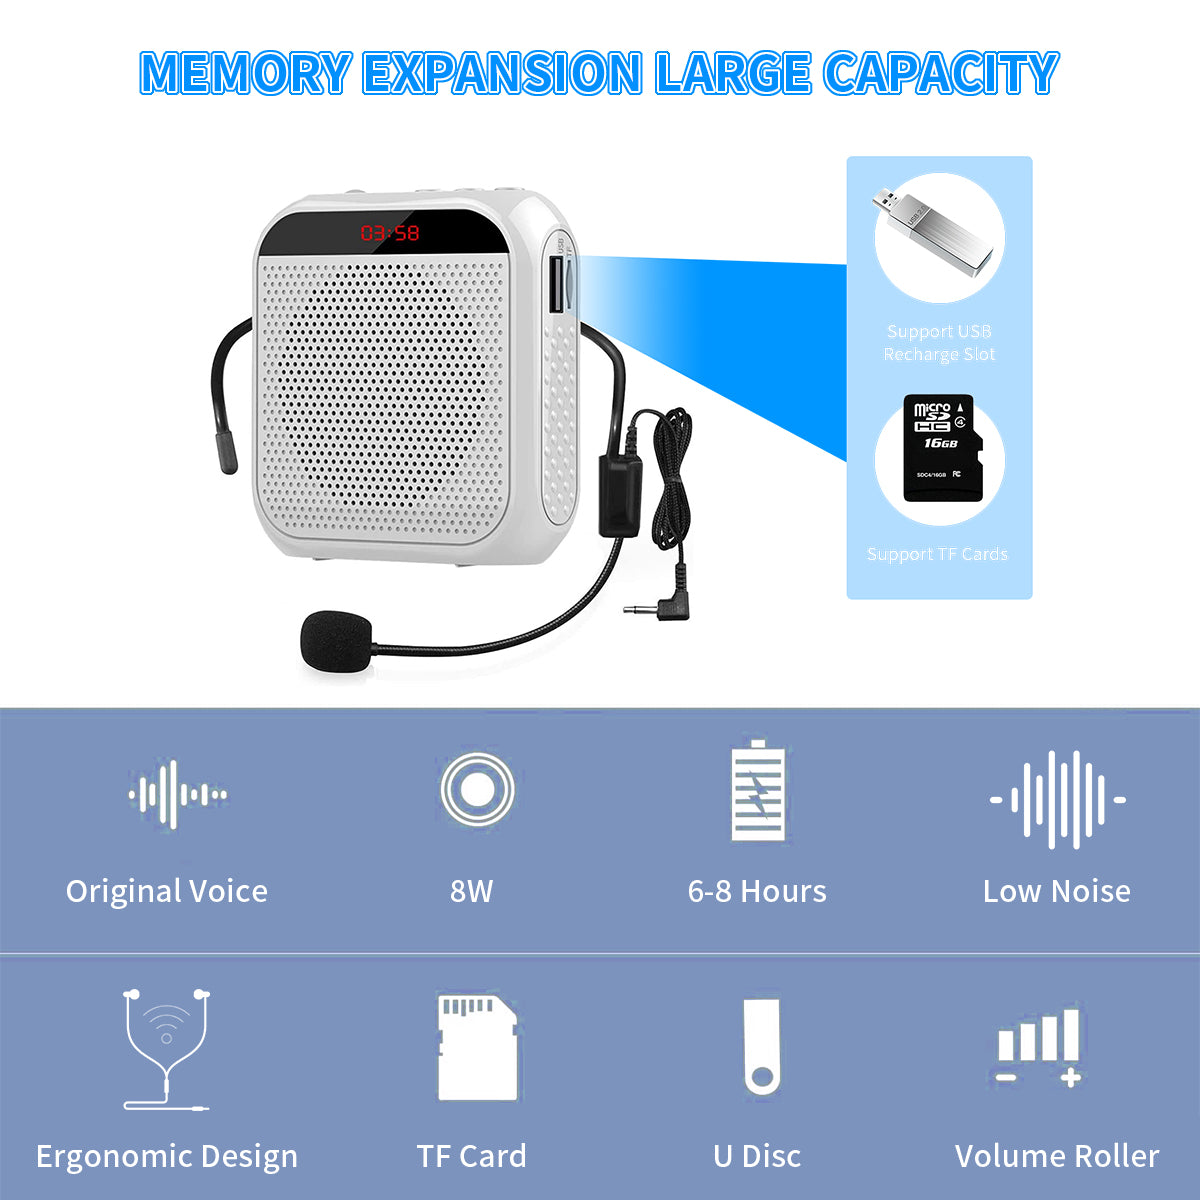 ZORBES Voice Amplifier for Teachers - Microphone Headset Set 2200 mAh, with Headset Microphone Support TF Card/U Flash Disk, Portable Voice Amplifier for Teachers, tour guide, coach, speaker